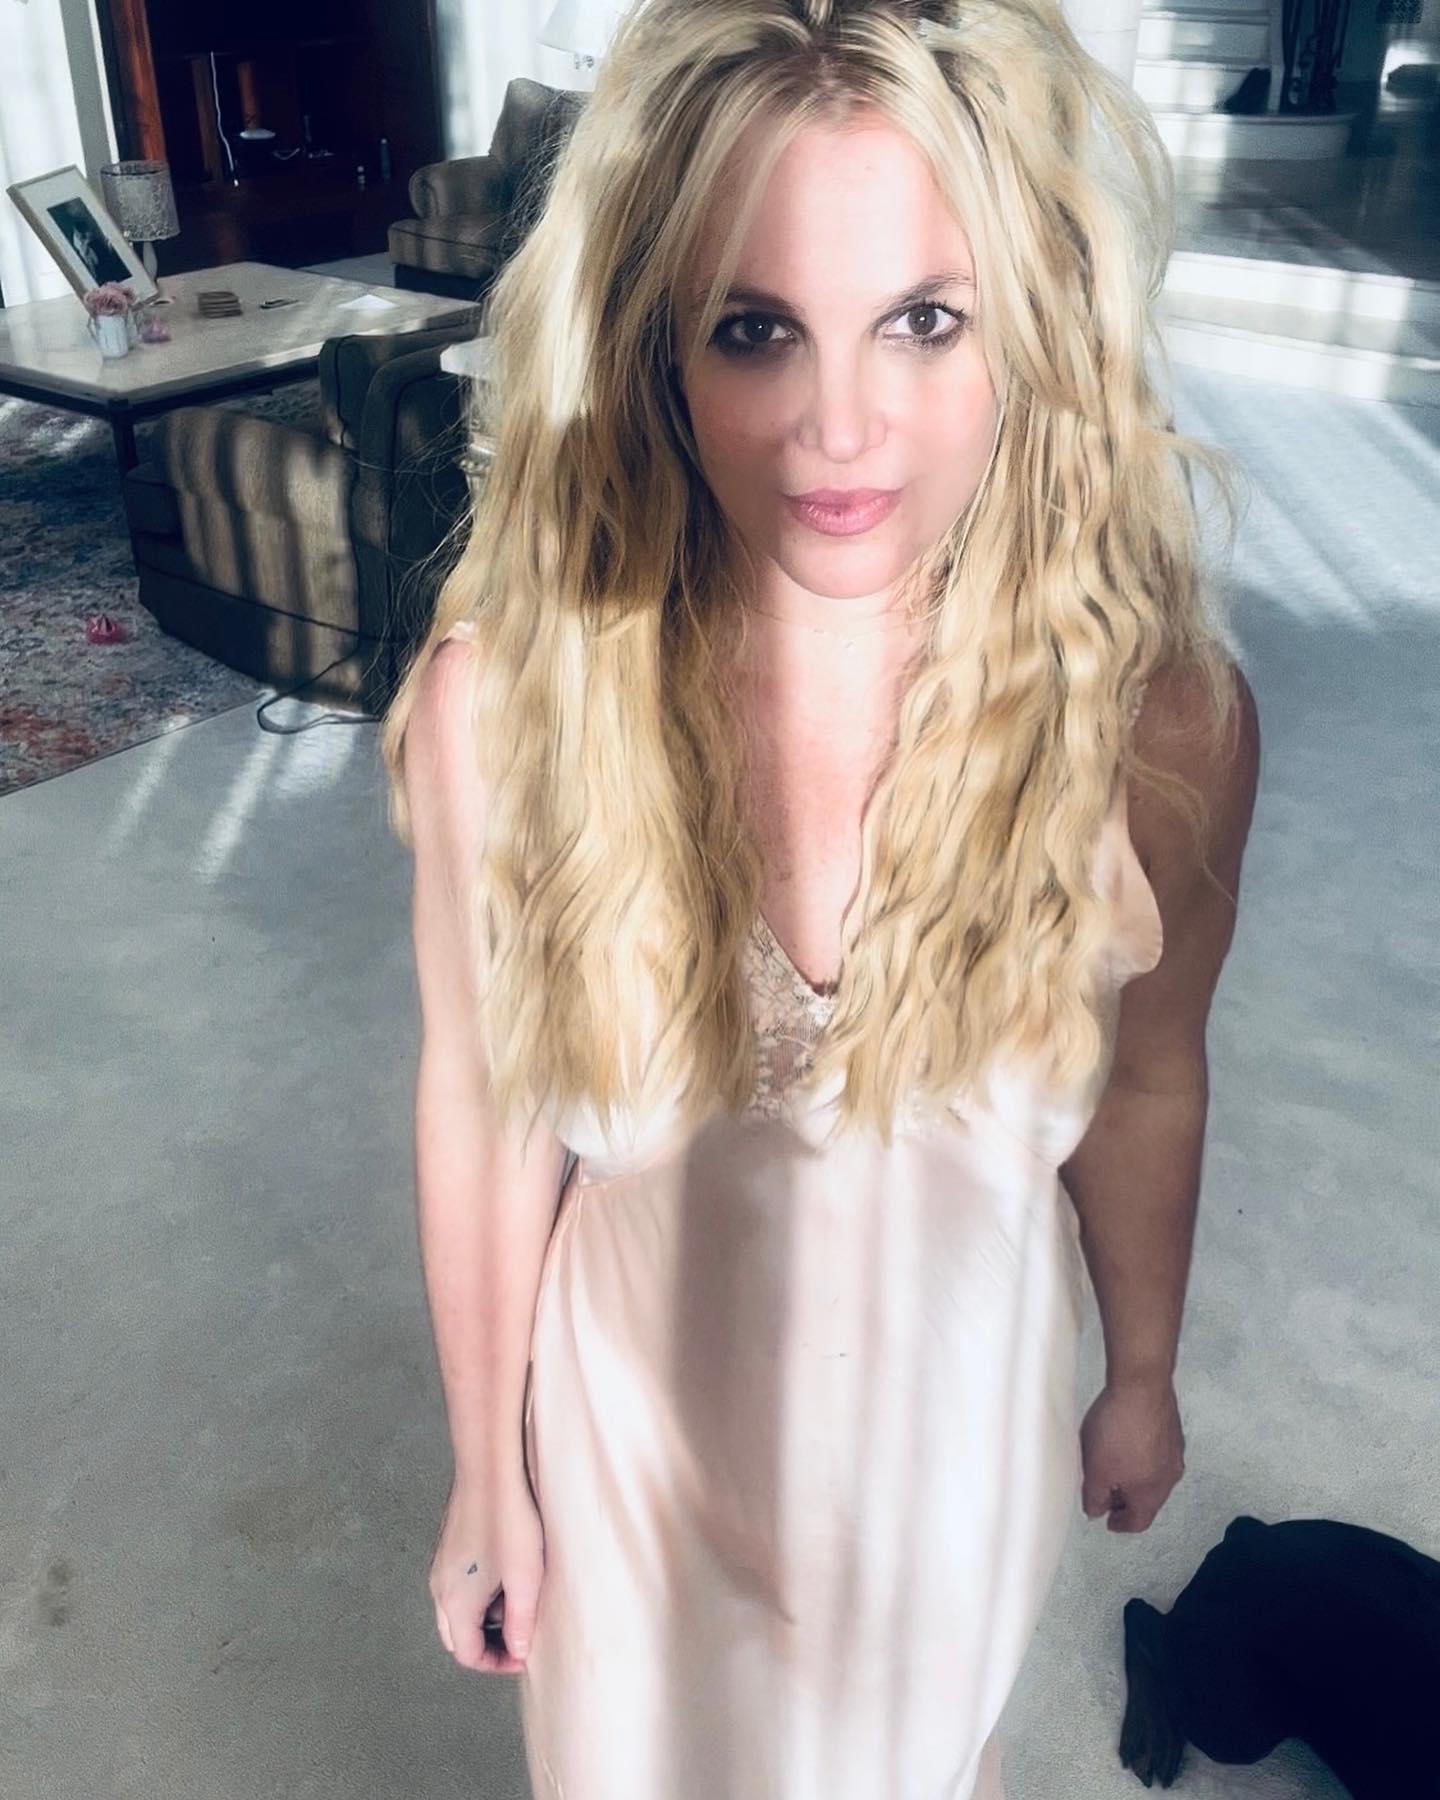 Britney Spears in a nightgown